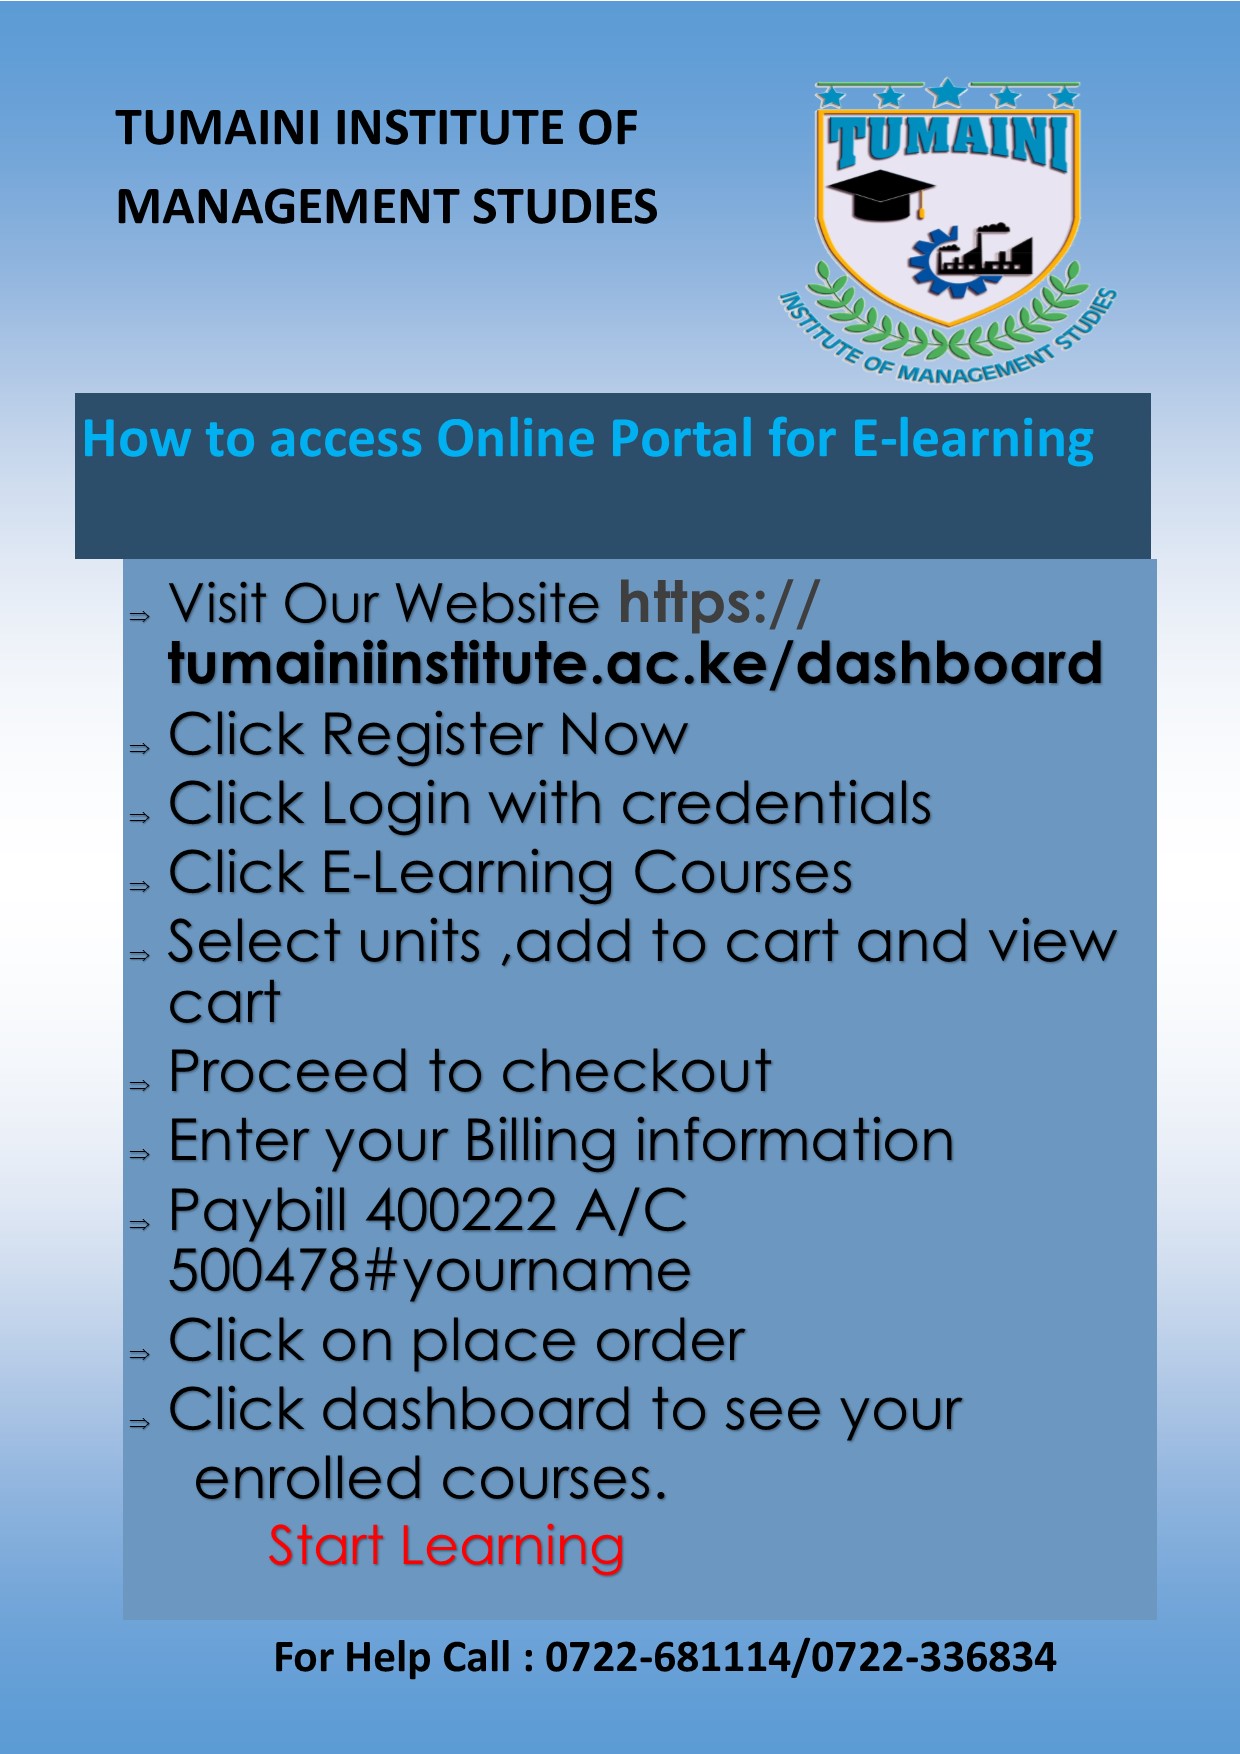 HOW TO ACCESS ONLINE PORTAL FOR LEARNING